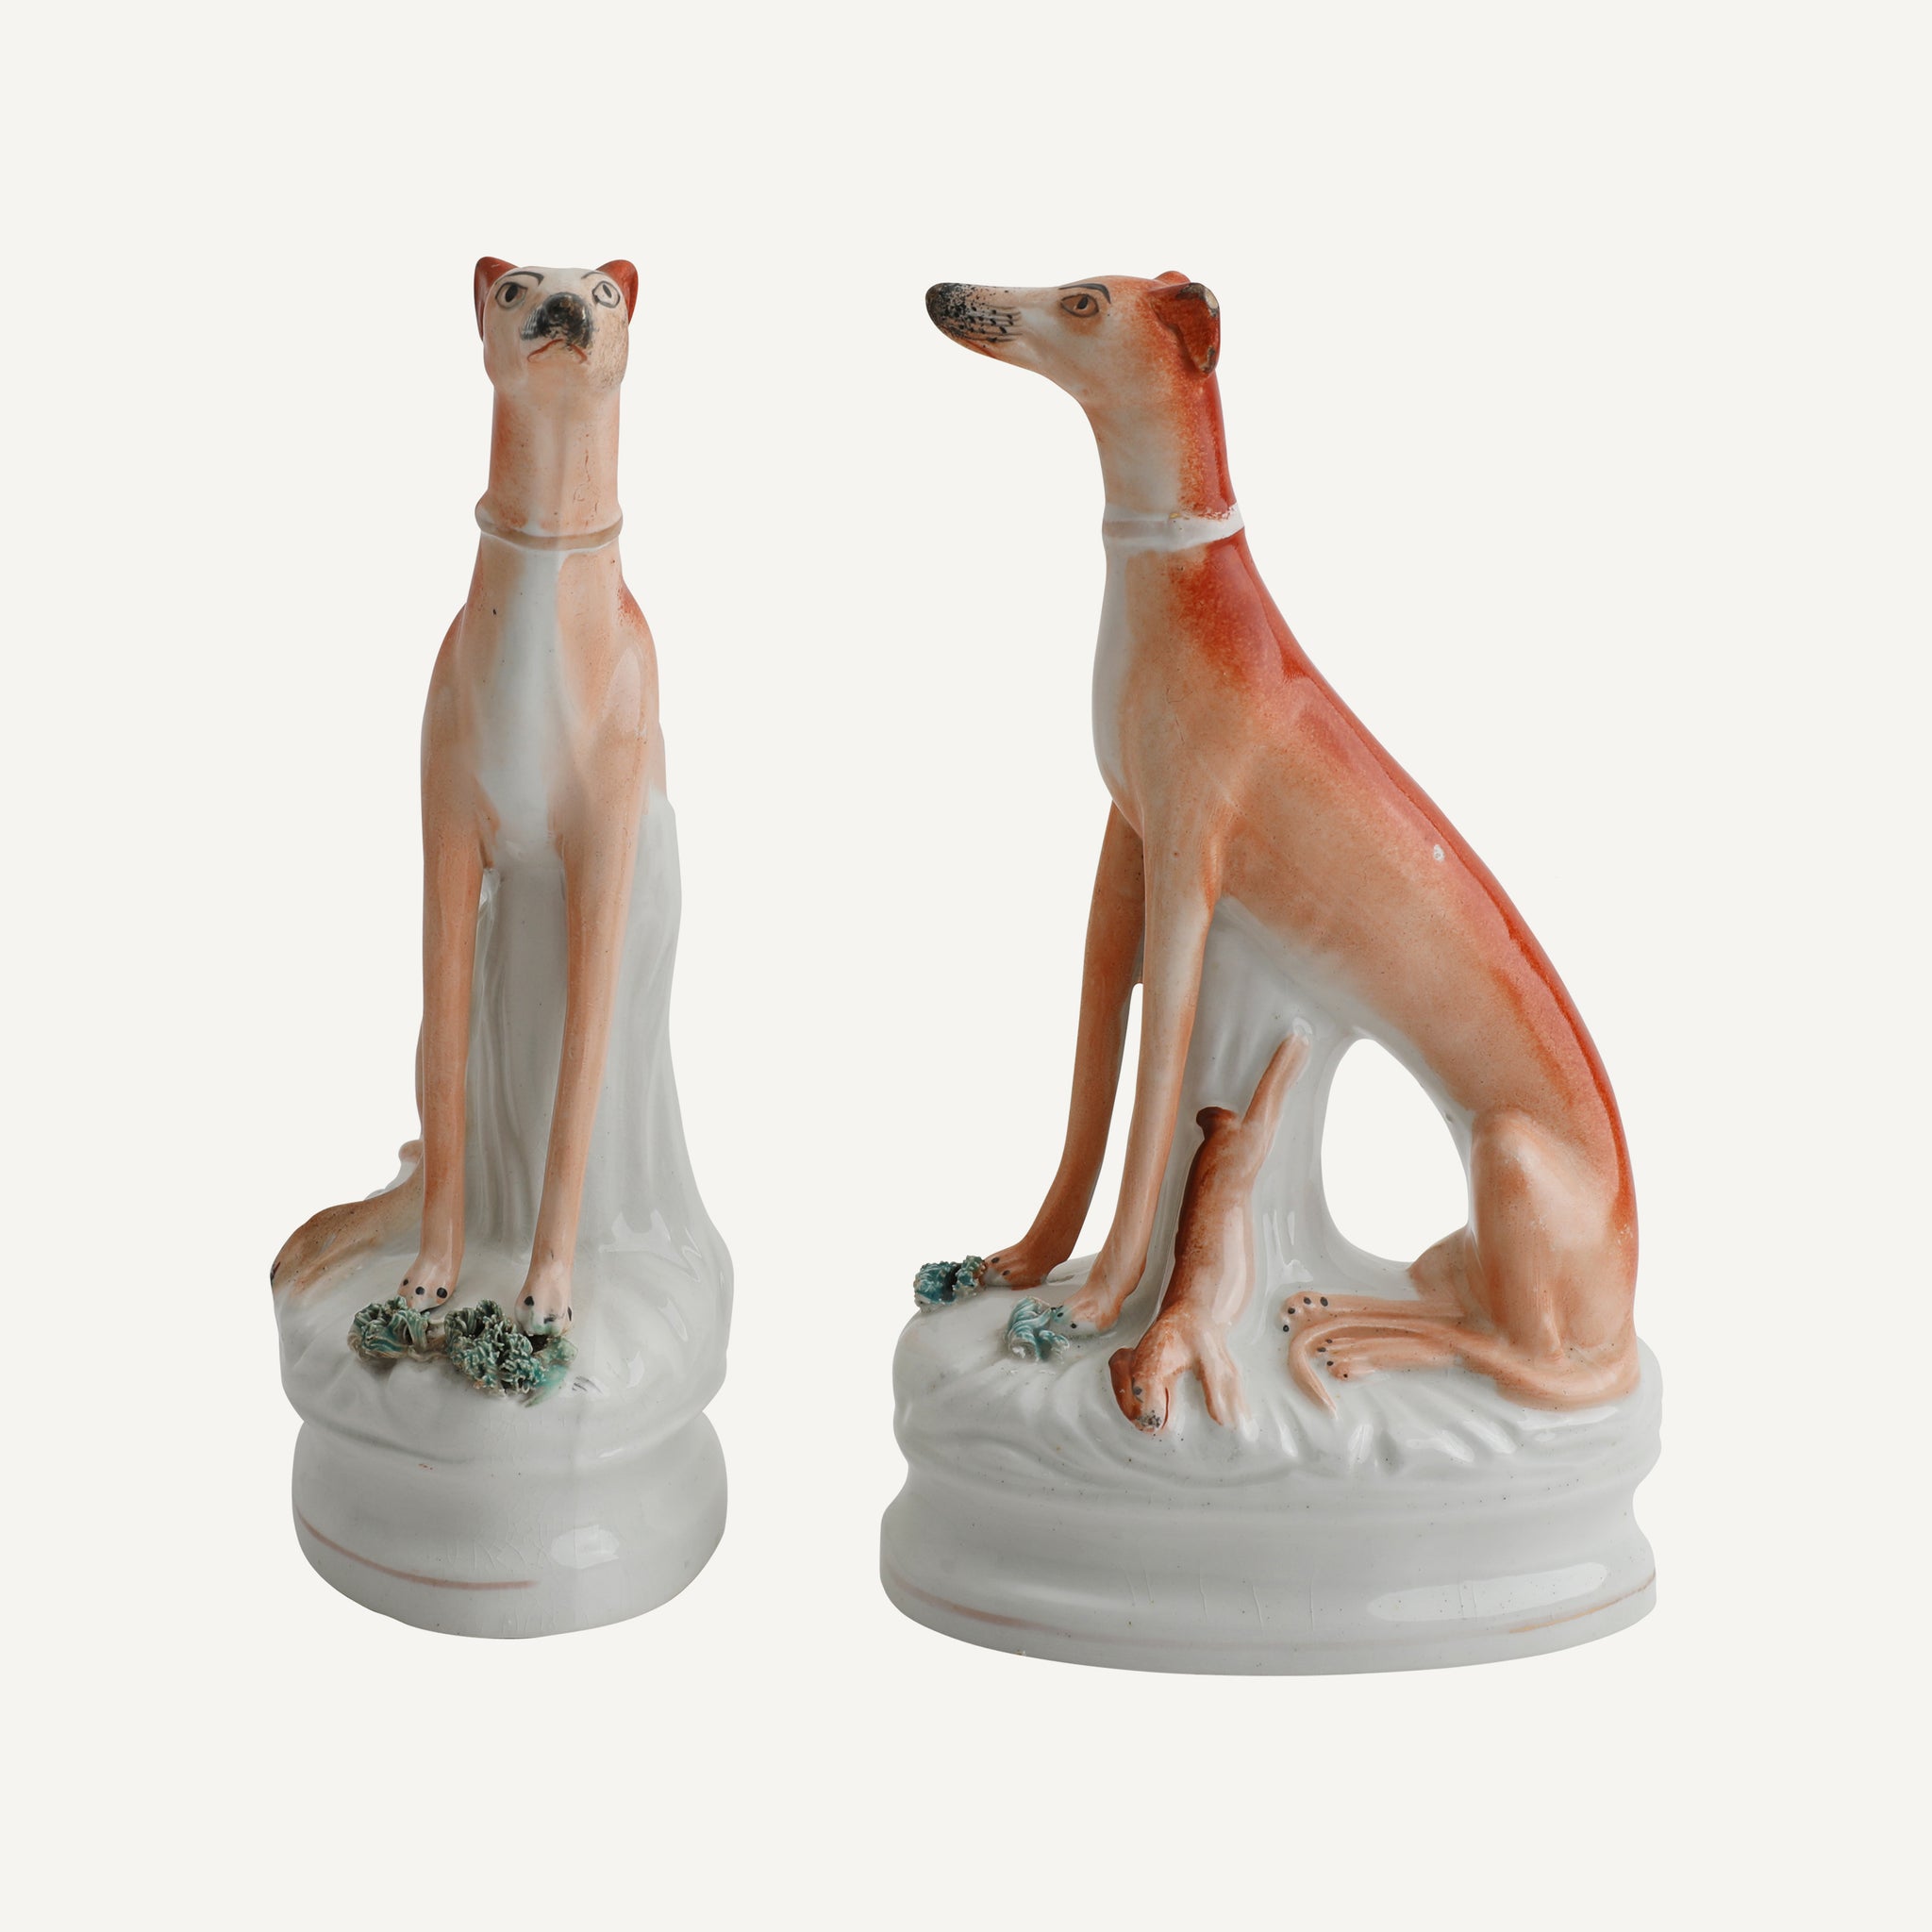 ANTIQUE STAFFORDSHIRE STATUES